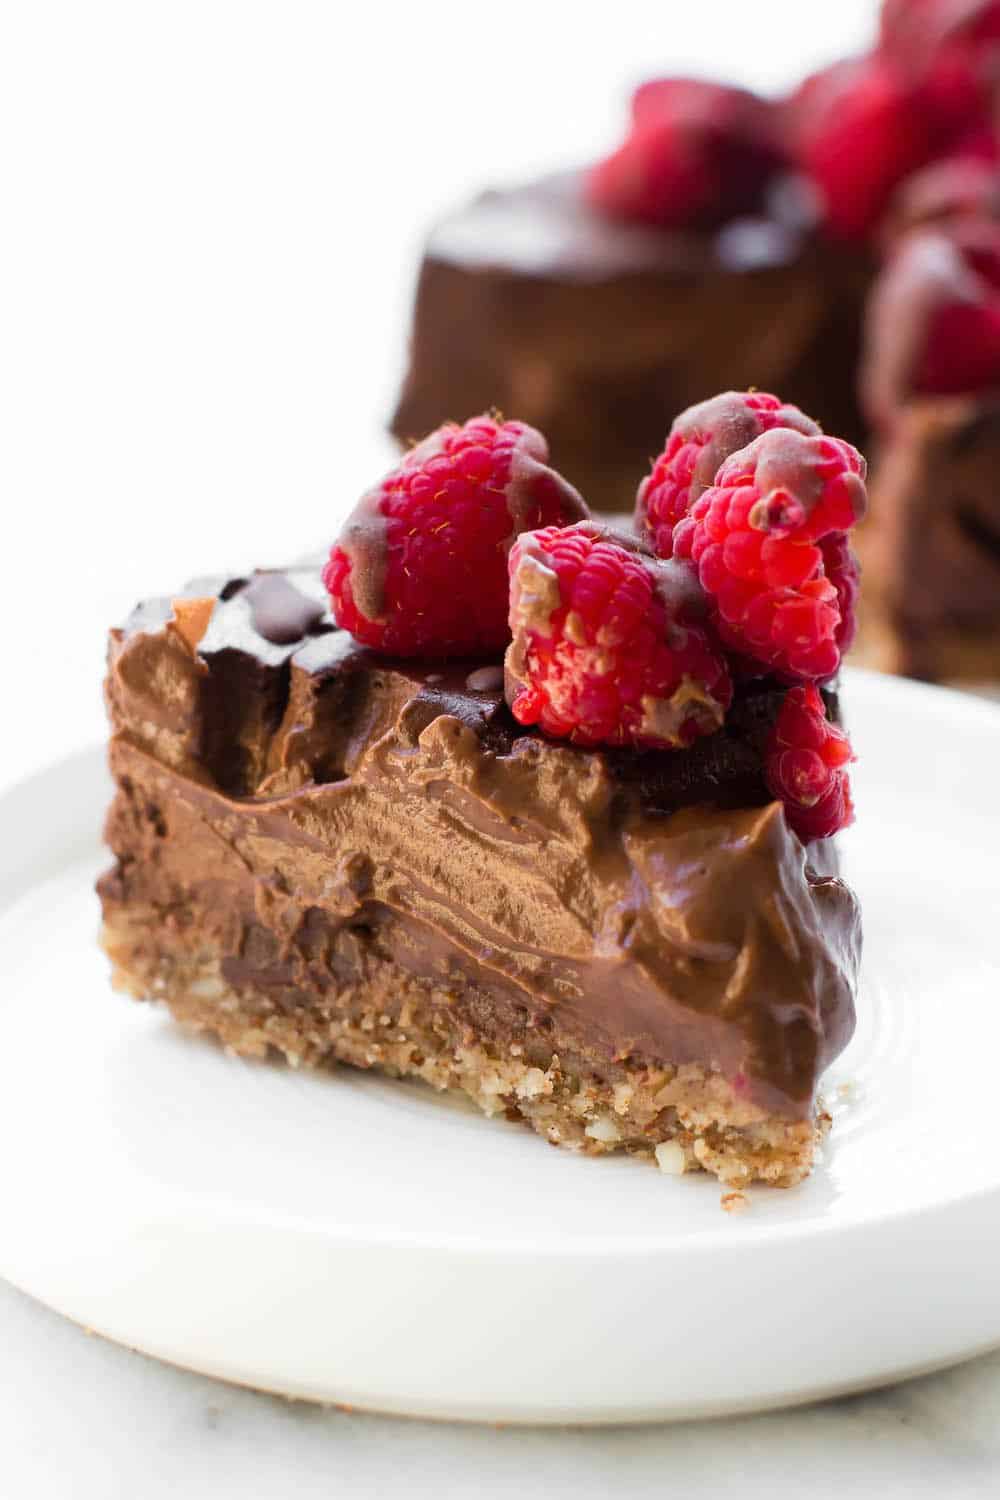 25 Drool-Worthy Chocolate Cake Recipes: Low-Fat Chocolate Mousse Cake